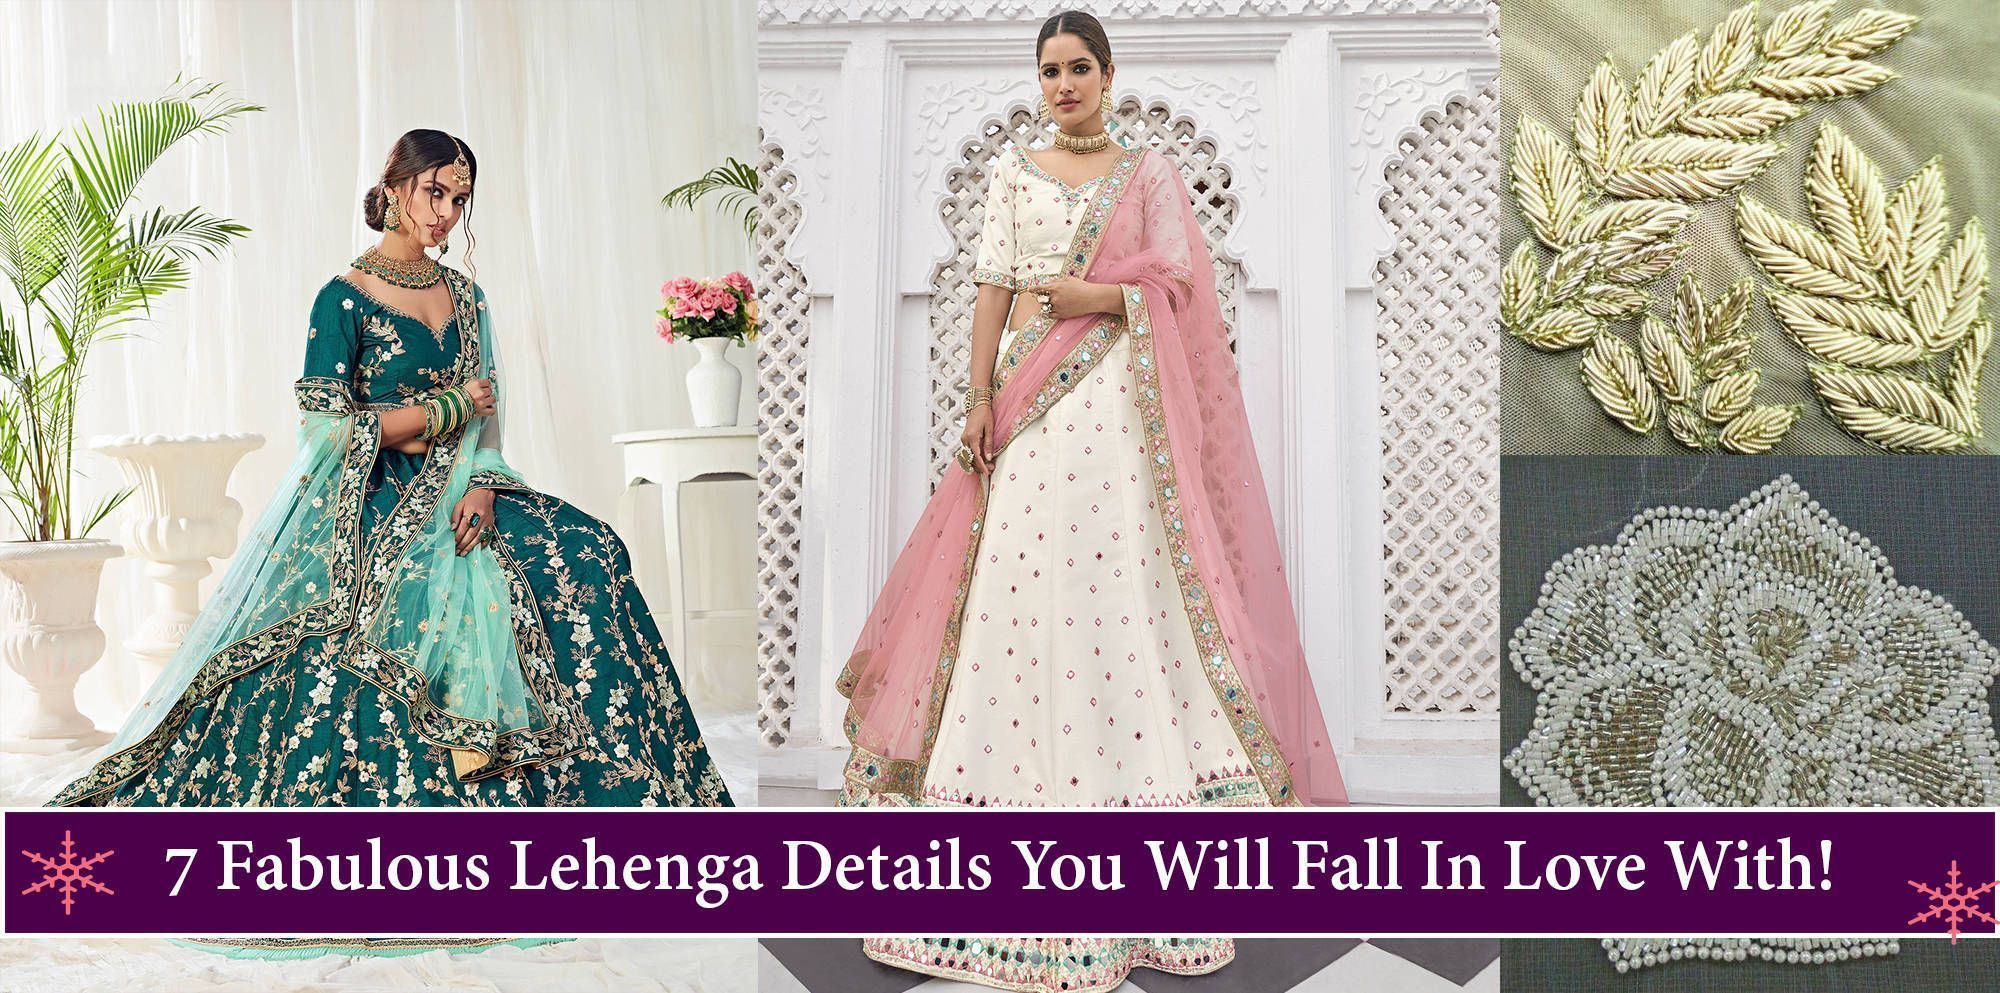 7 Fabulous Lehenga Details You Will Fall In Love With!